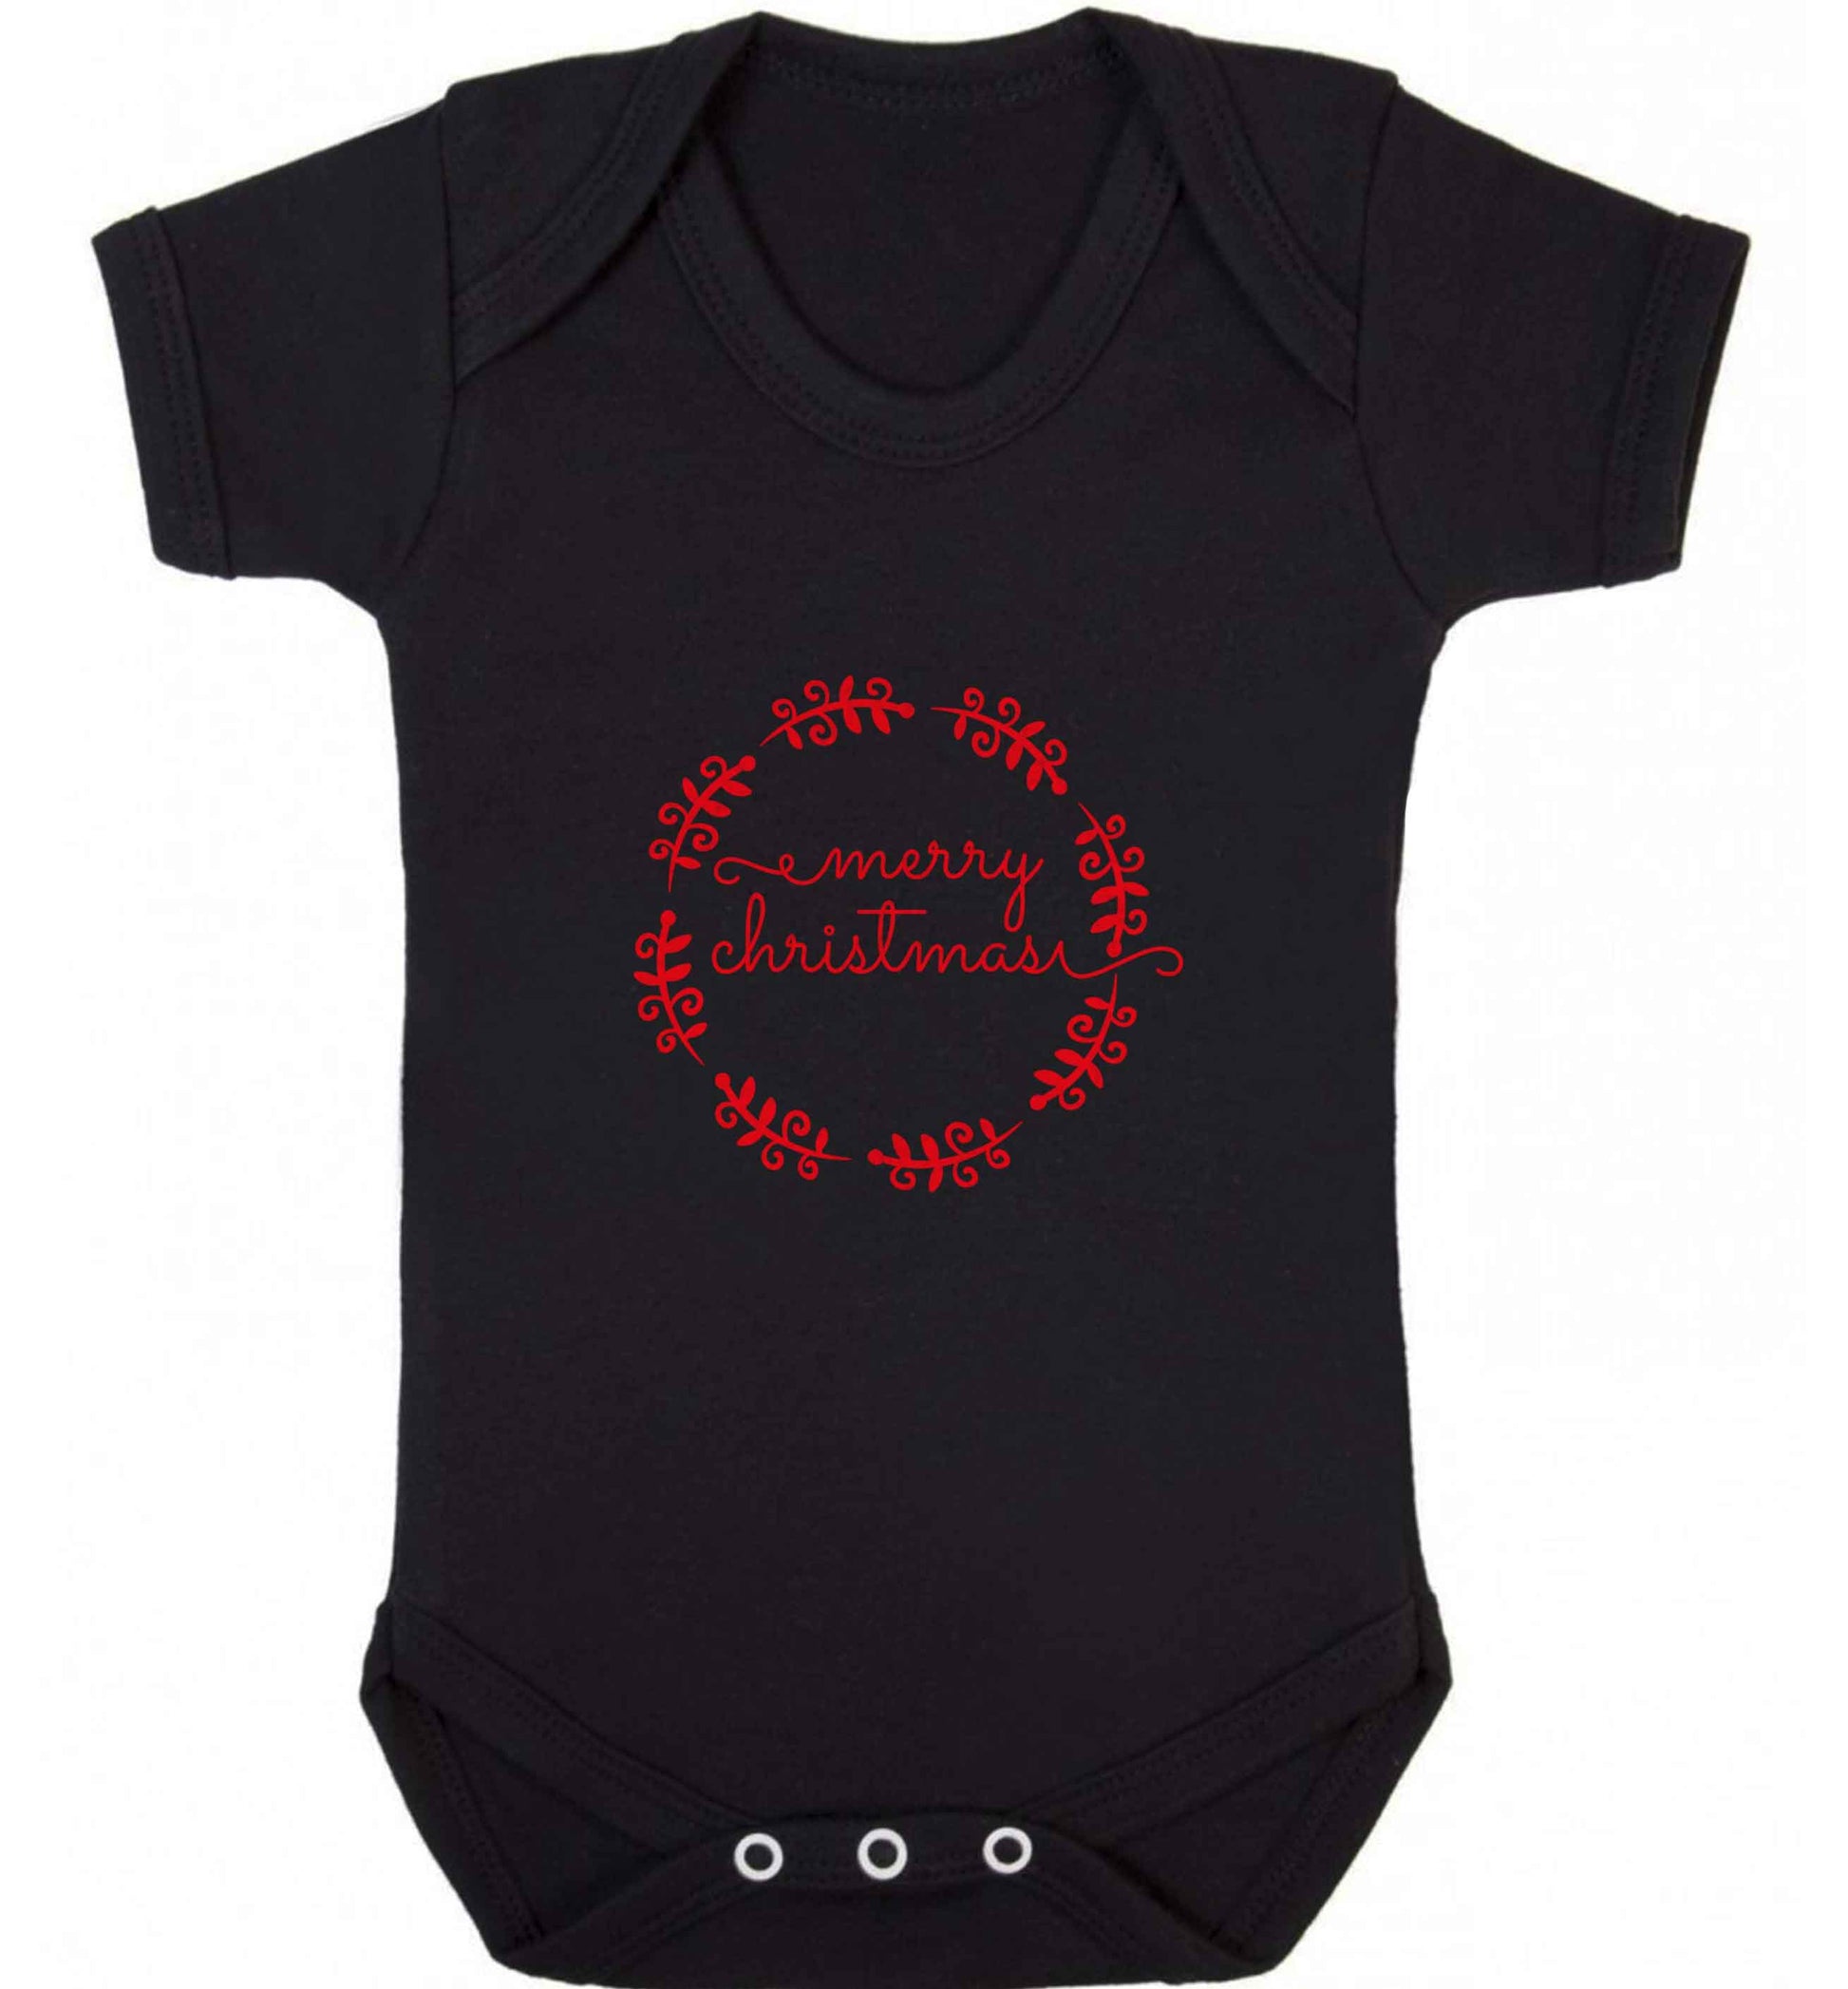 Merry christmas baby vest black 18-24 months